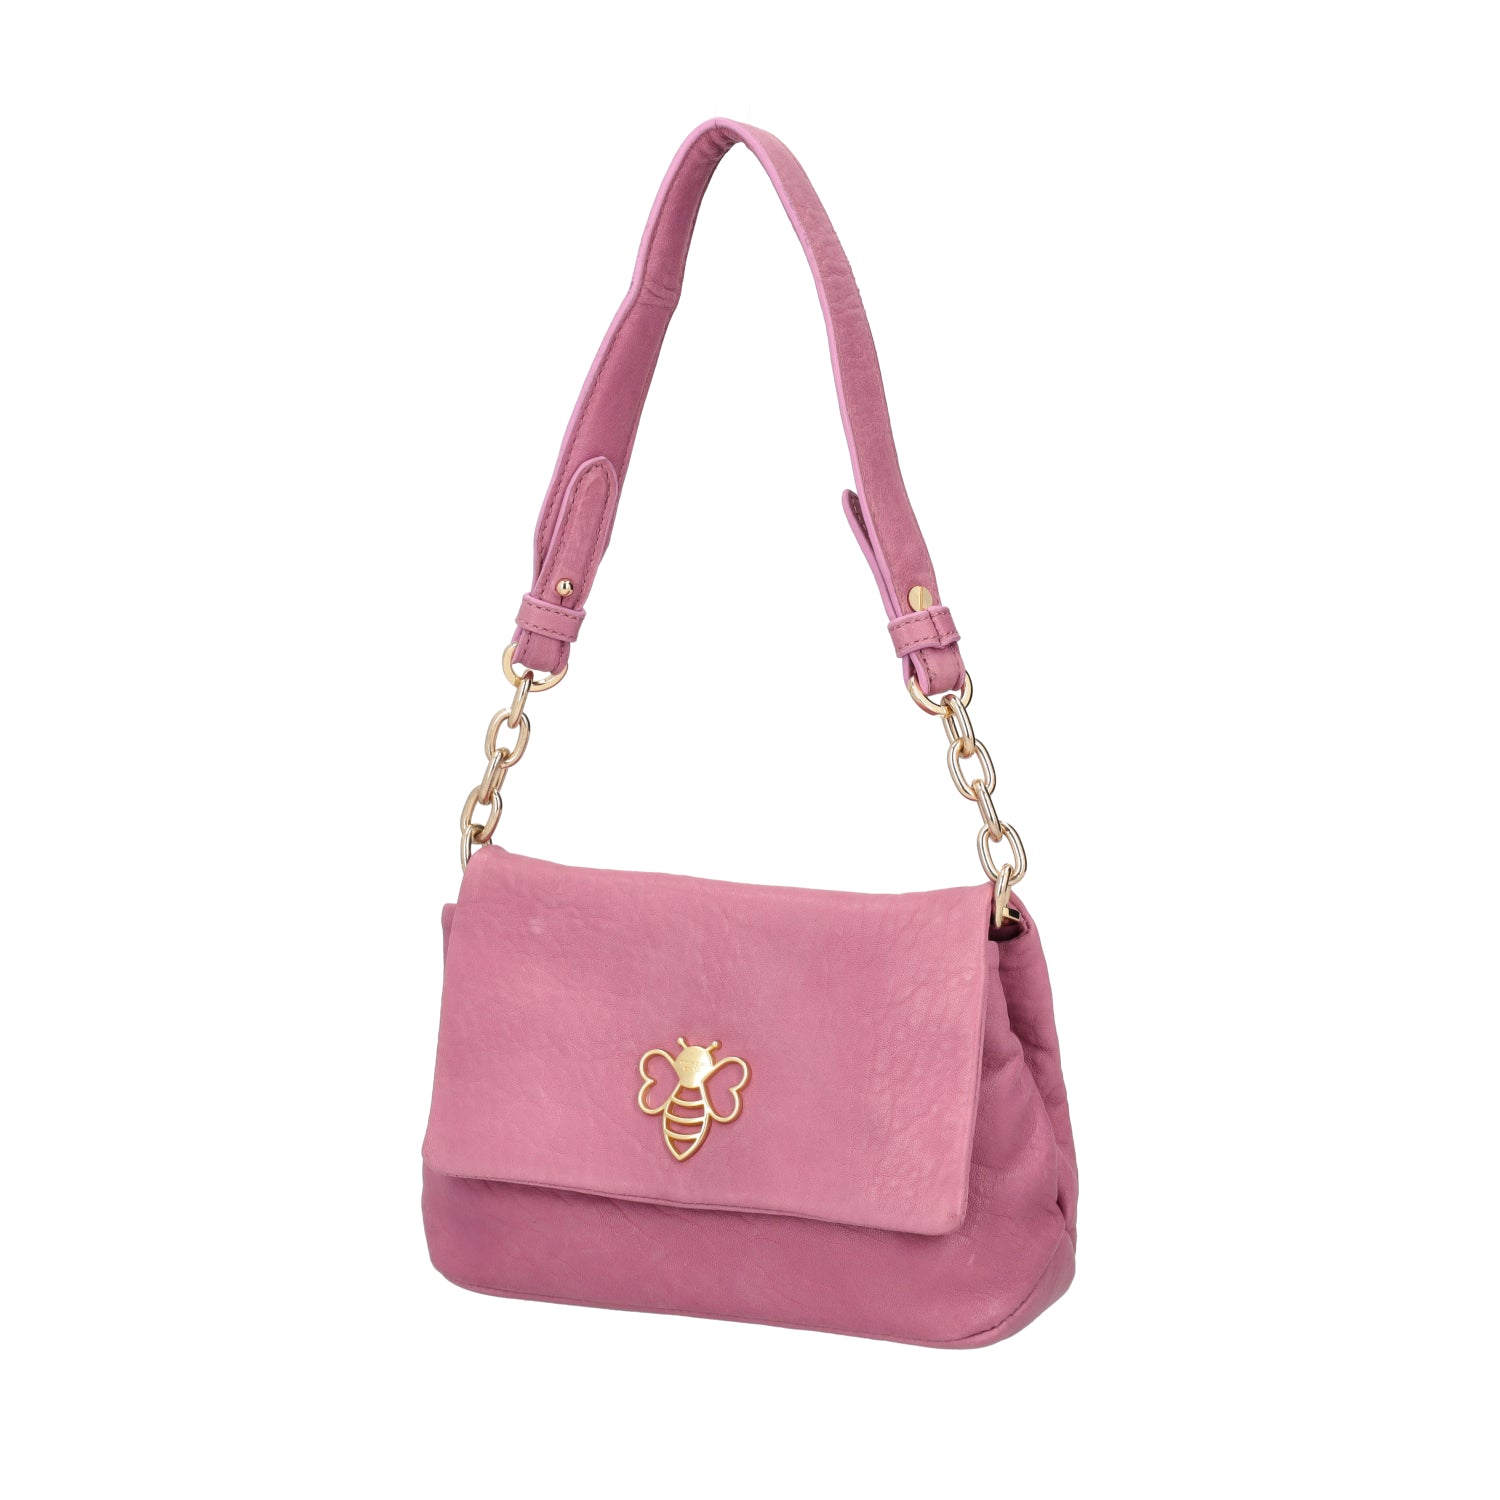 PINK GLADIOLO CROSSBODY BAG IN LEATHER